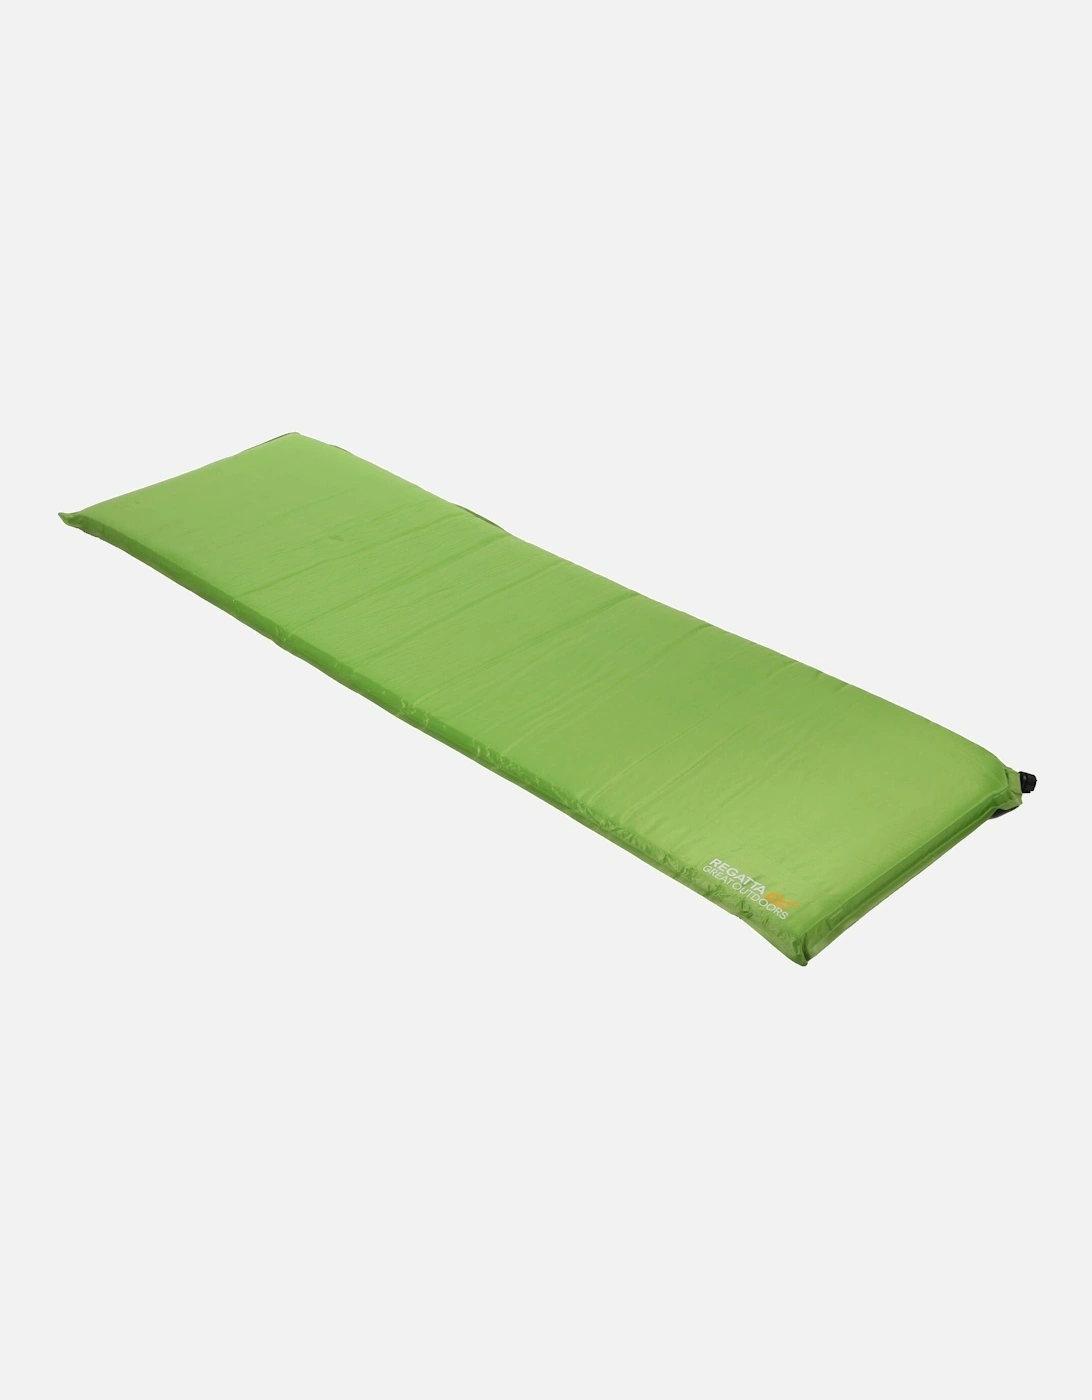 Napa 5 Lightweight Self Inflating Foam Camping Mat - Extrme Green - One Size, 3 of 2